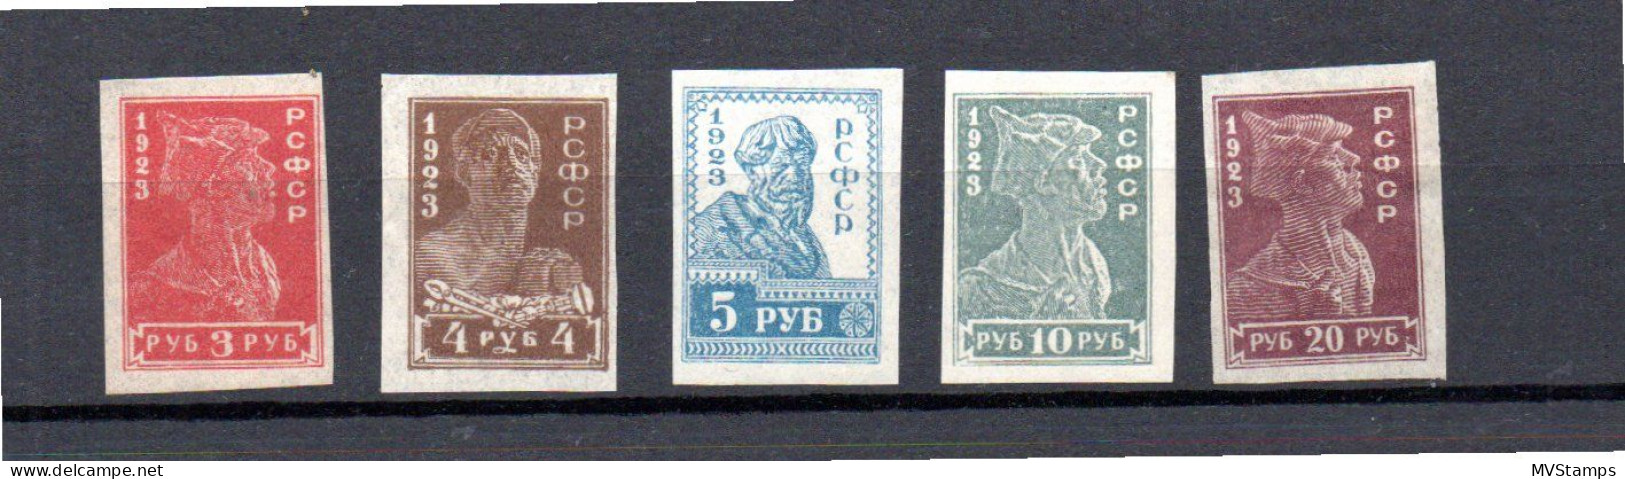 Russia 1923 Set Imperved Definitive Stamps (Michel 215/19 B) MLH - Used Stamps